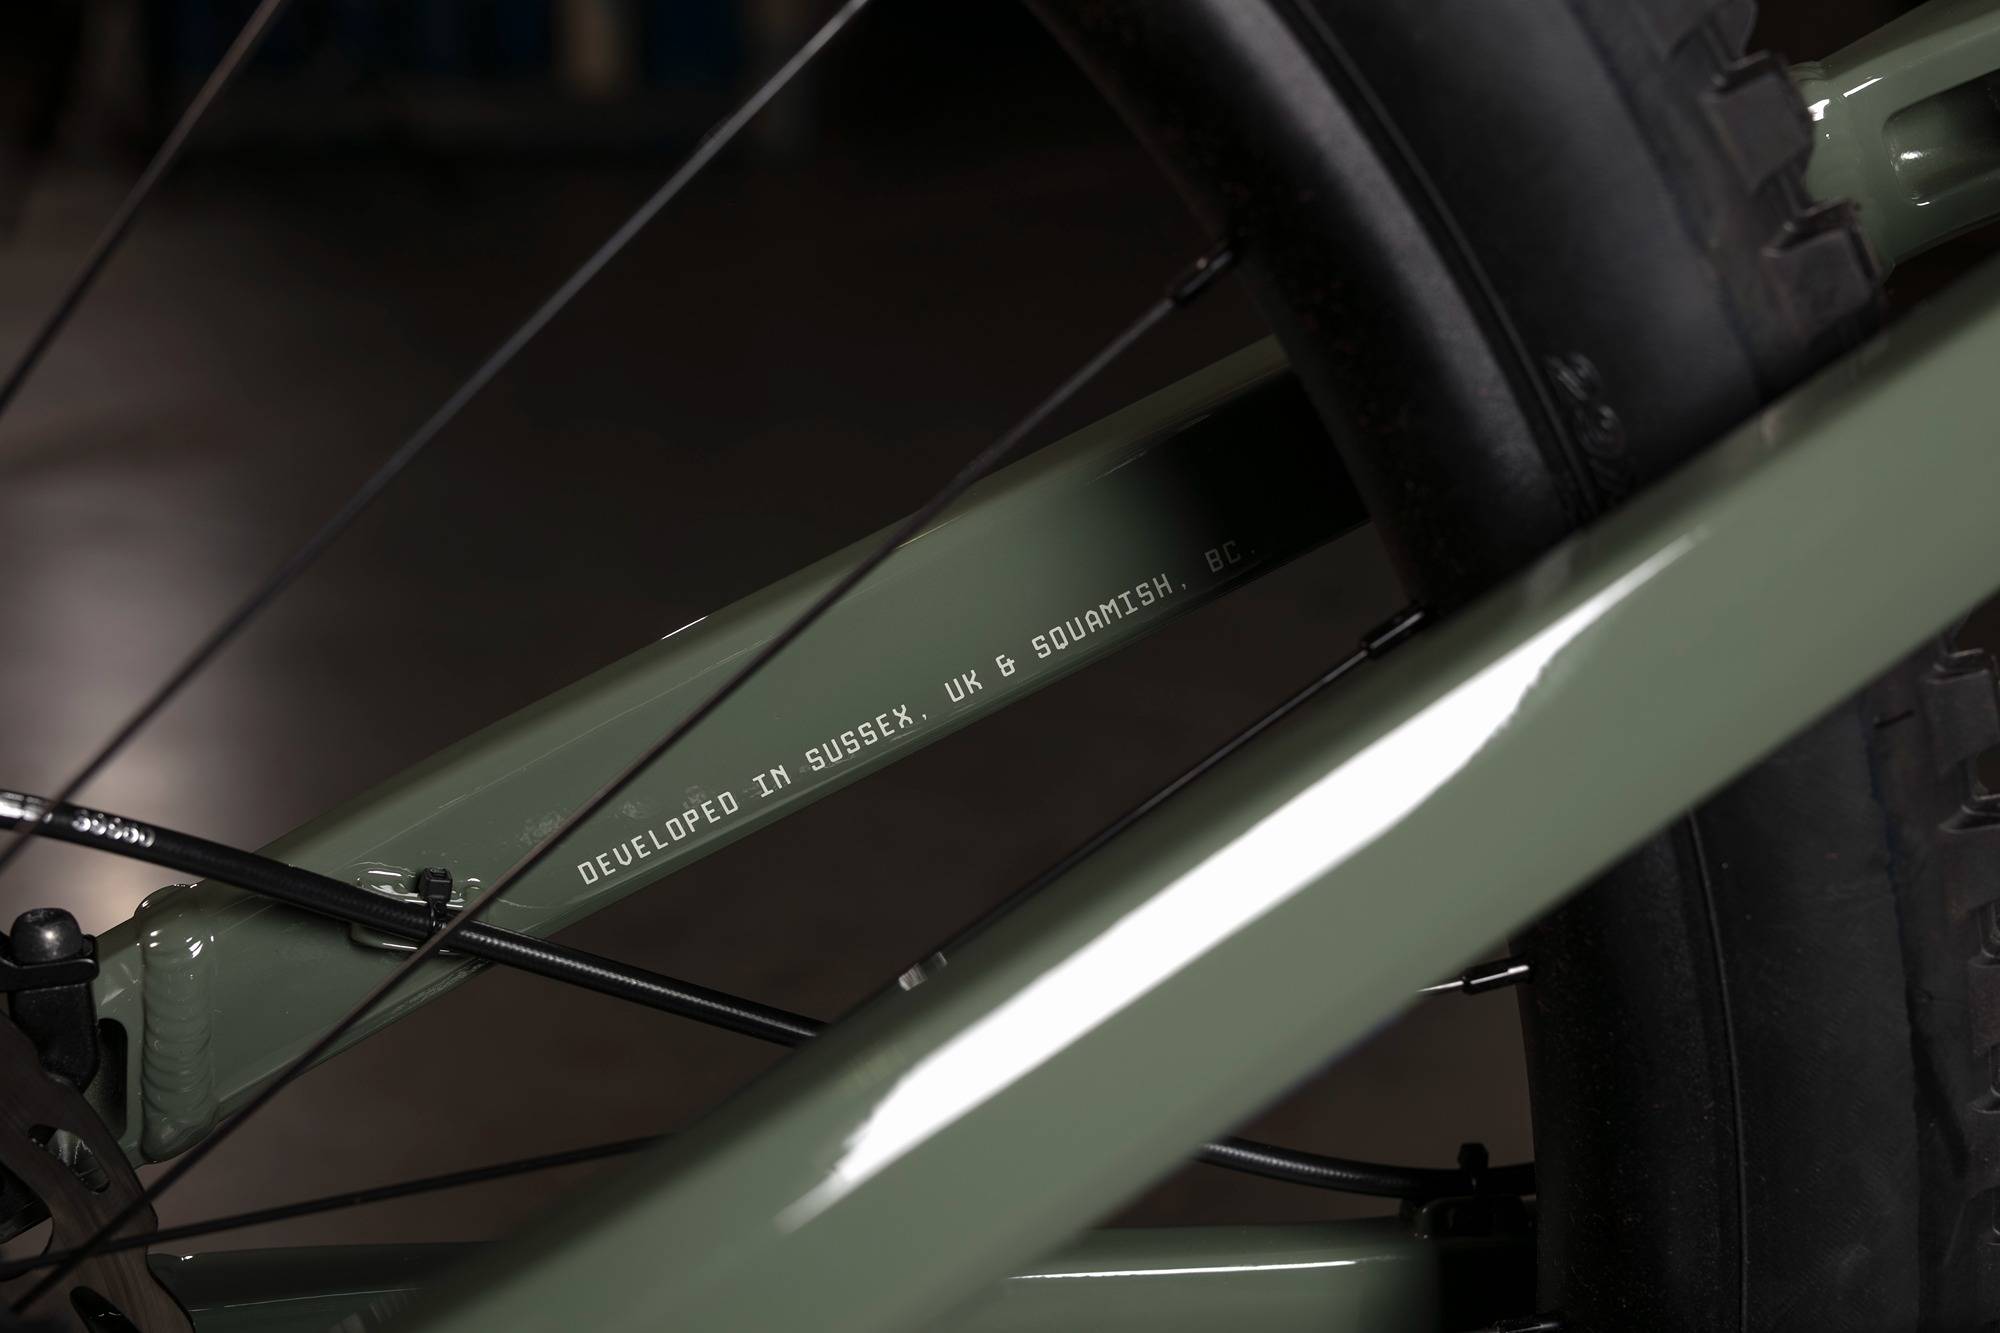 Privateer 161 seat stays in green